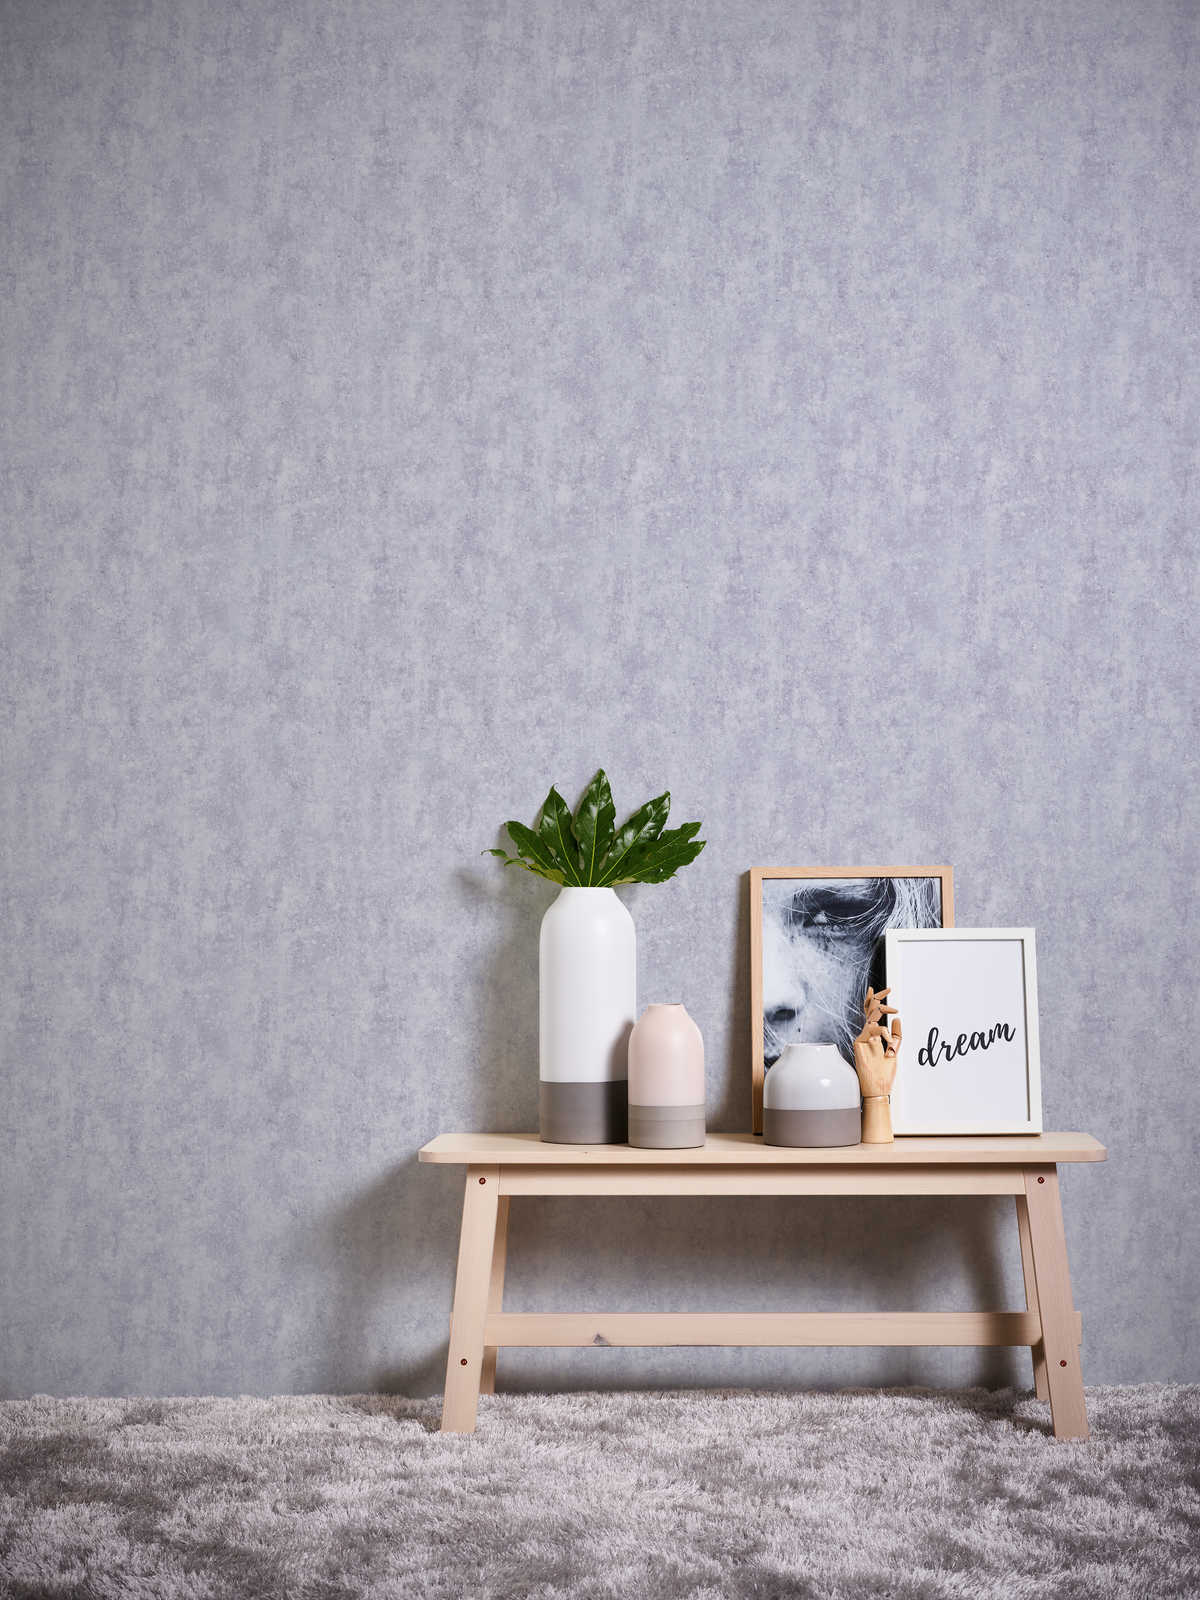             Concrete look wallpaper youth room - grey, blue
        